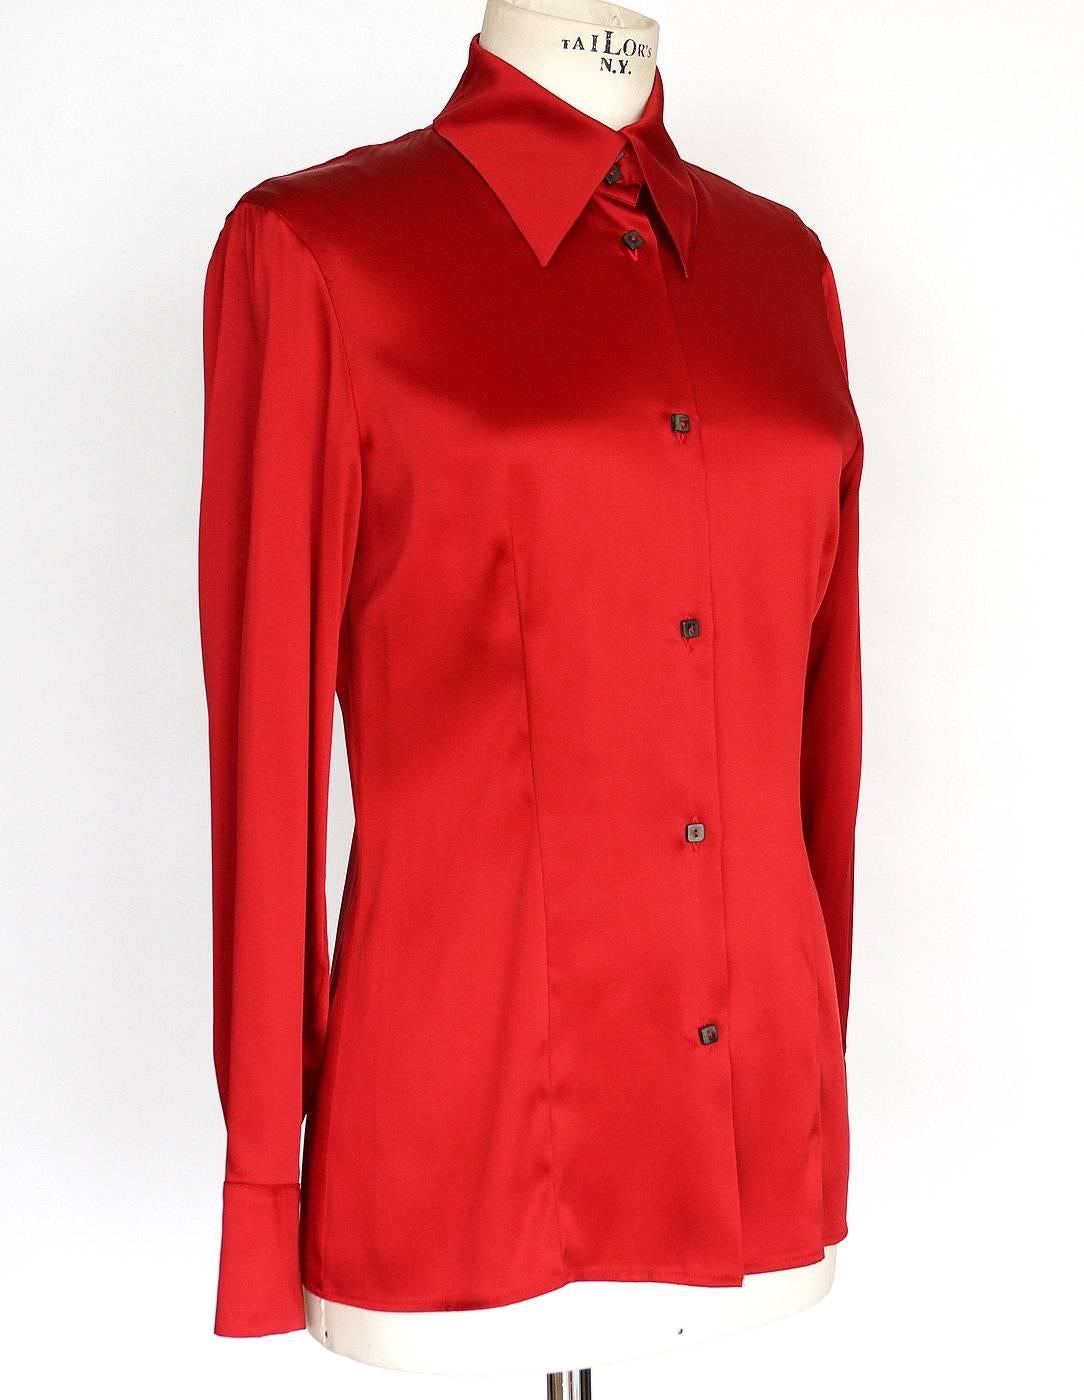 Guaranteed authentic GIANFRANCO FERRE beautiful red blouse. 
Beautiful and timeless Chinese red blouse.
7 small square buttons with 2 buttons at the collar.
Stitching detail gently shapes this blouse in front and back.
2 buttons on each cuff.
Fabric